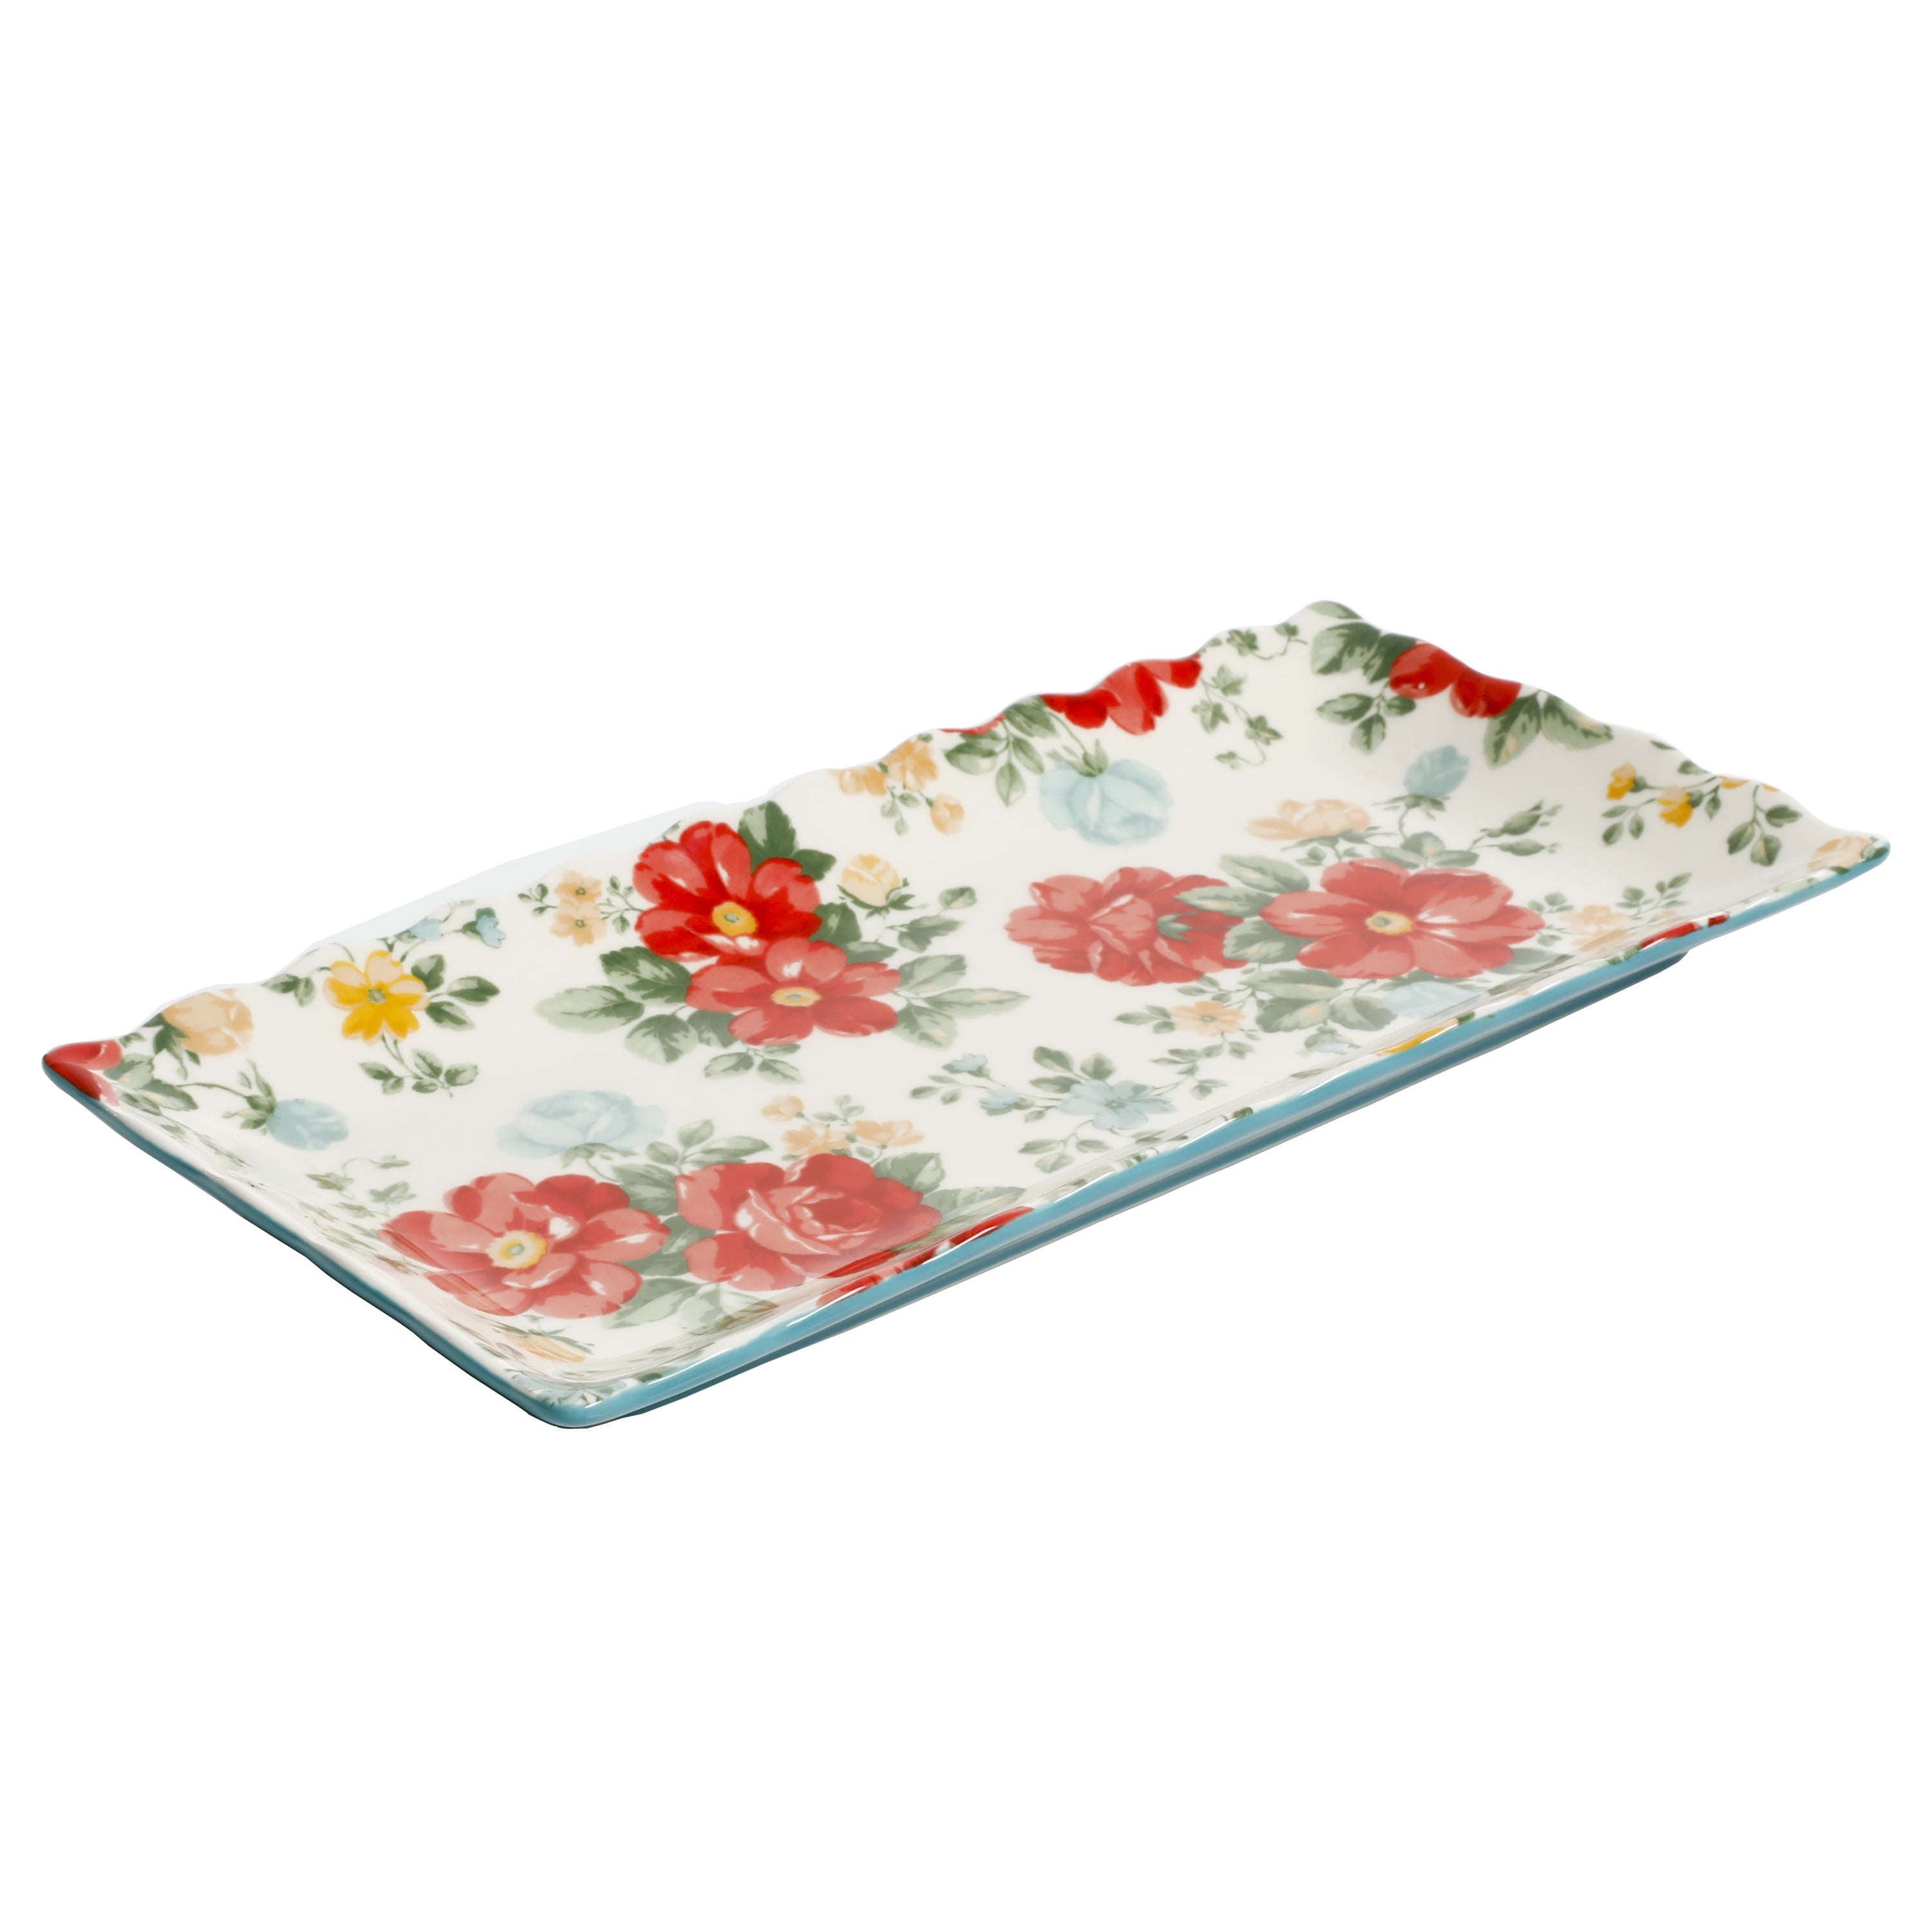 The Pioneer Woman Floral Medley 3-piece Serving Platters Durable Stoneware for sale online 